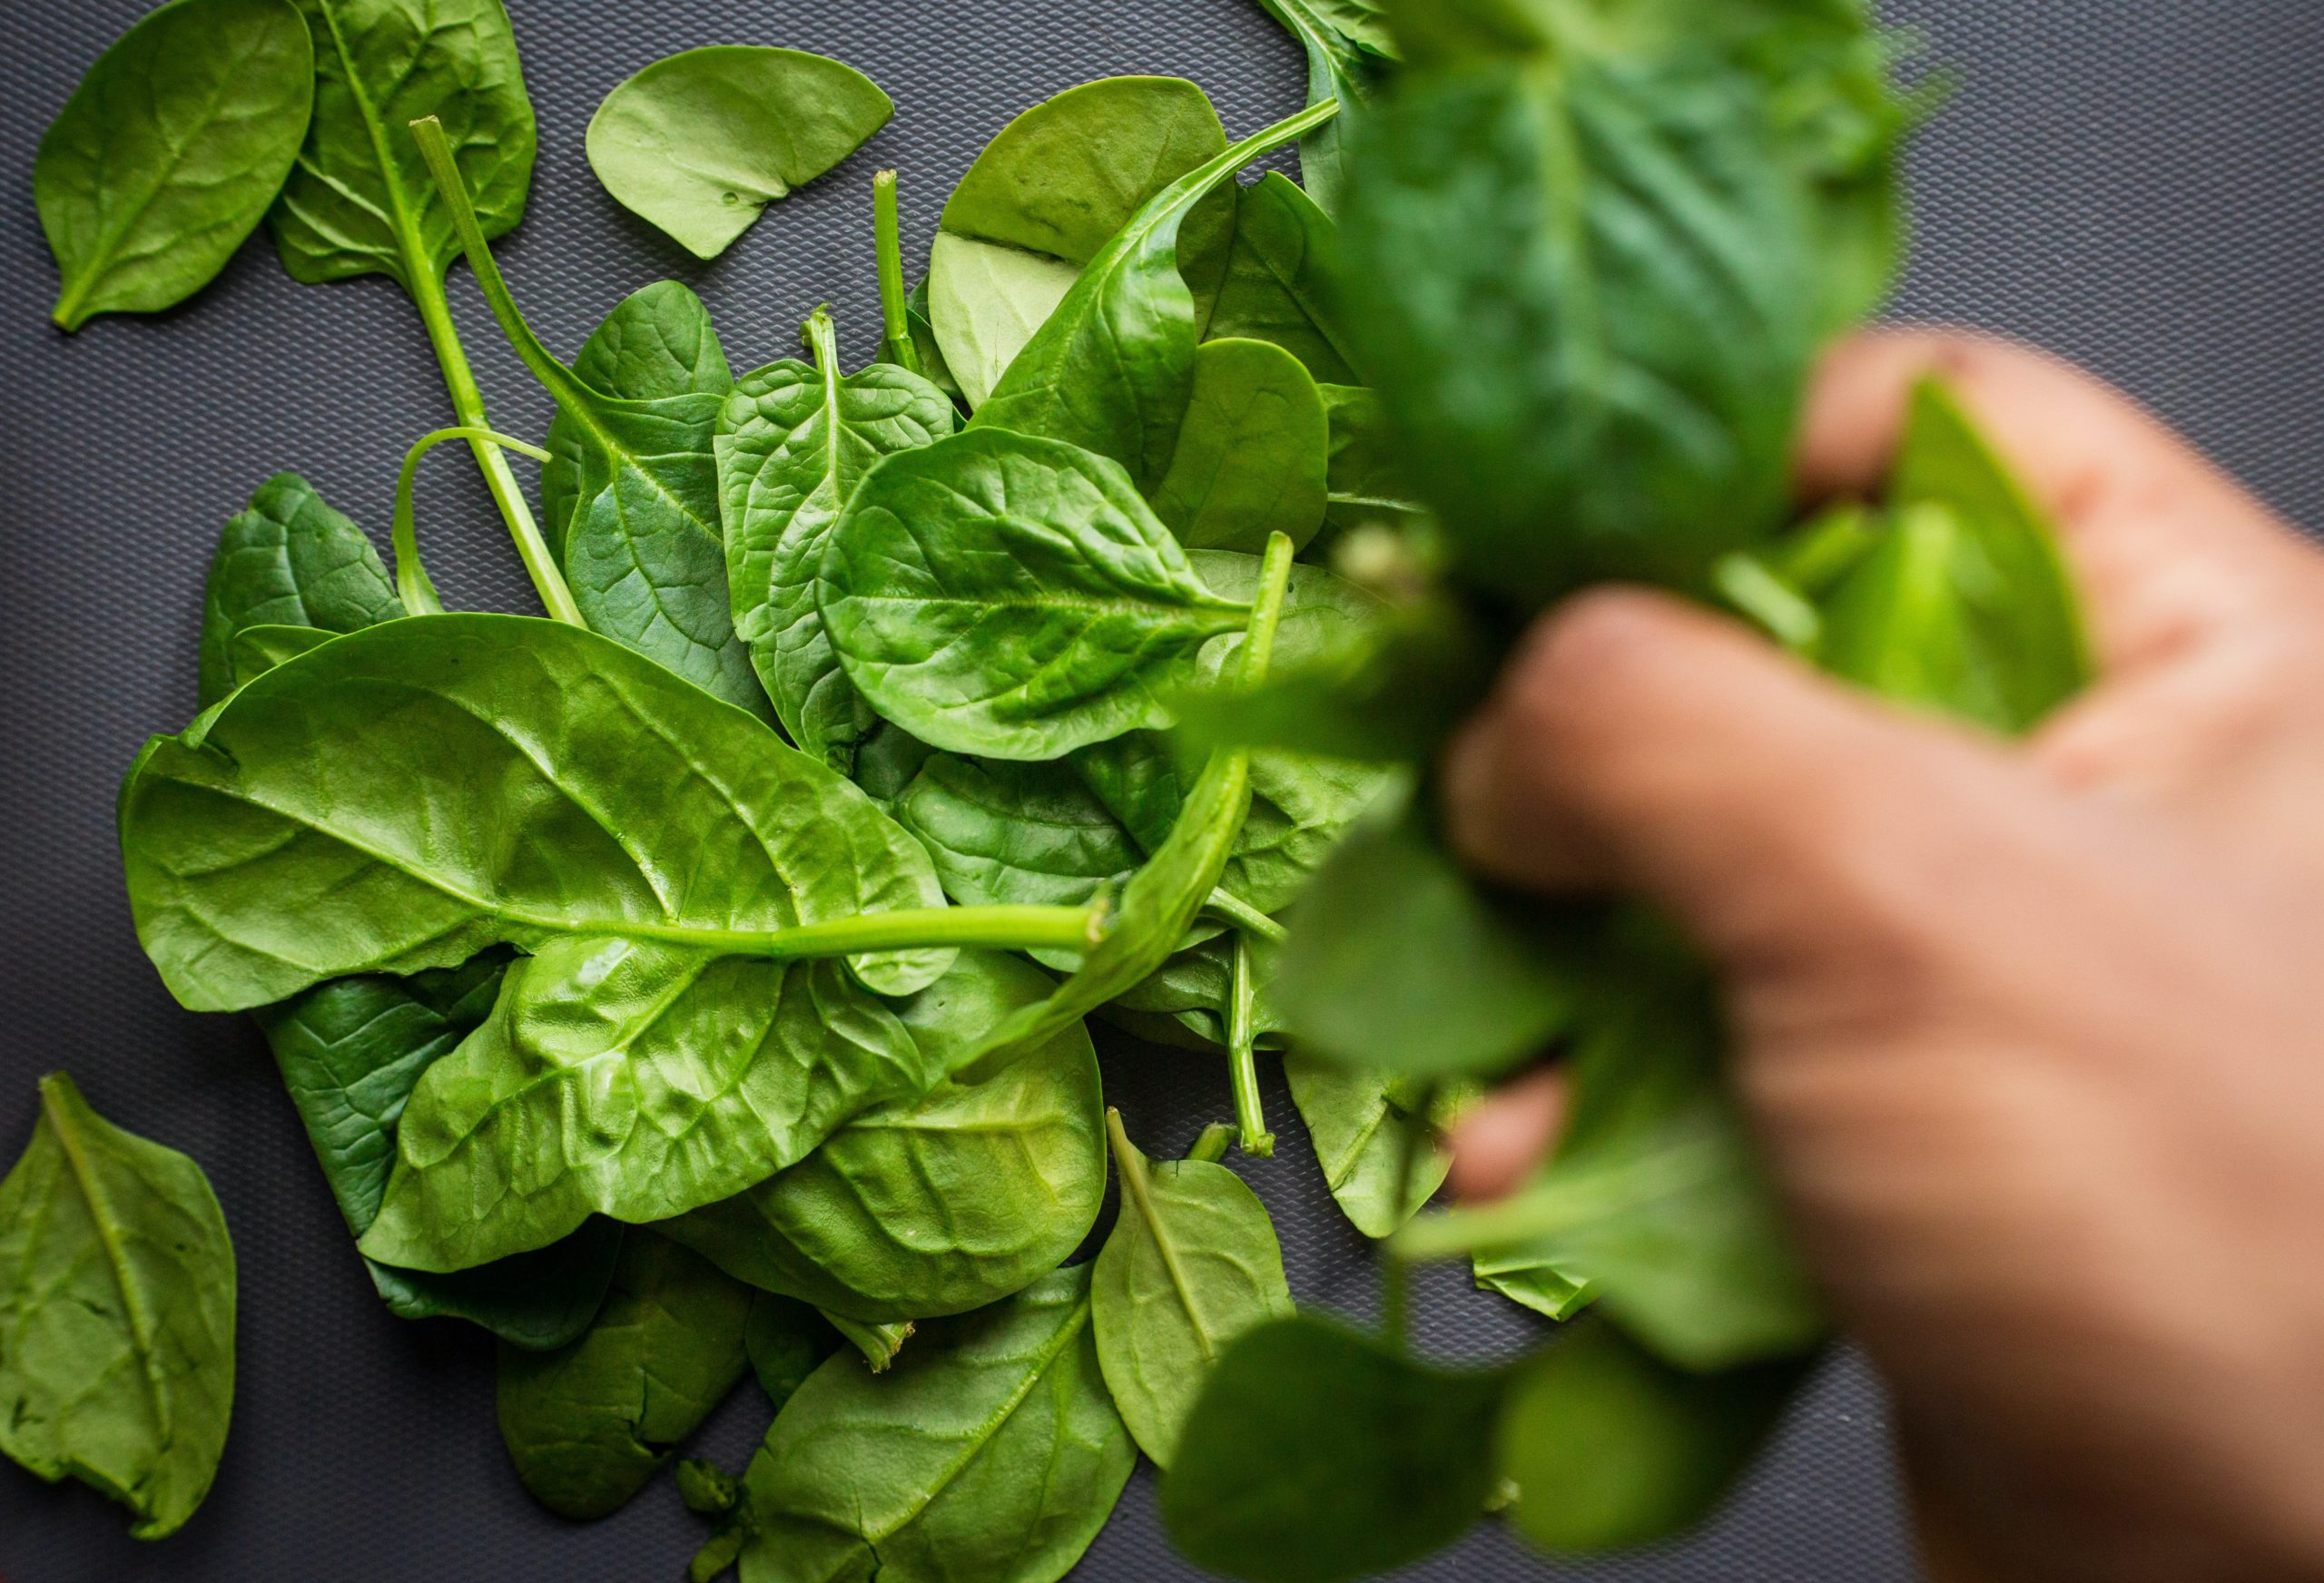 Pile of spinach leaves. Spinach is rich in vitamin E, which supports brain health and function. Image from Unsplash.